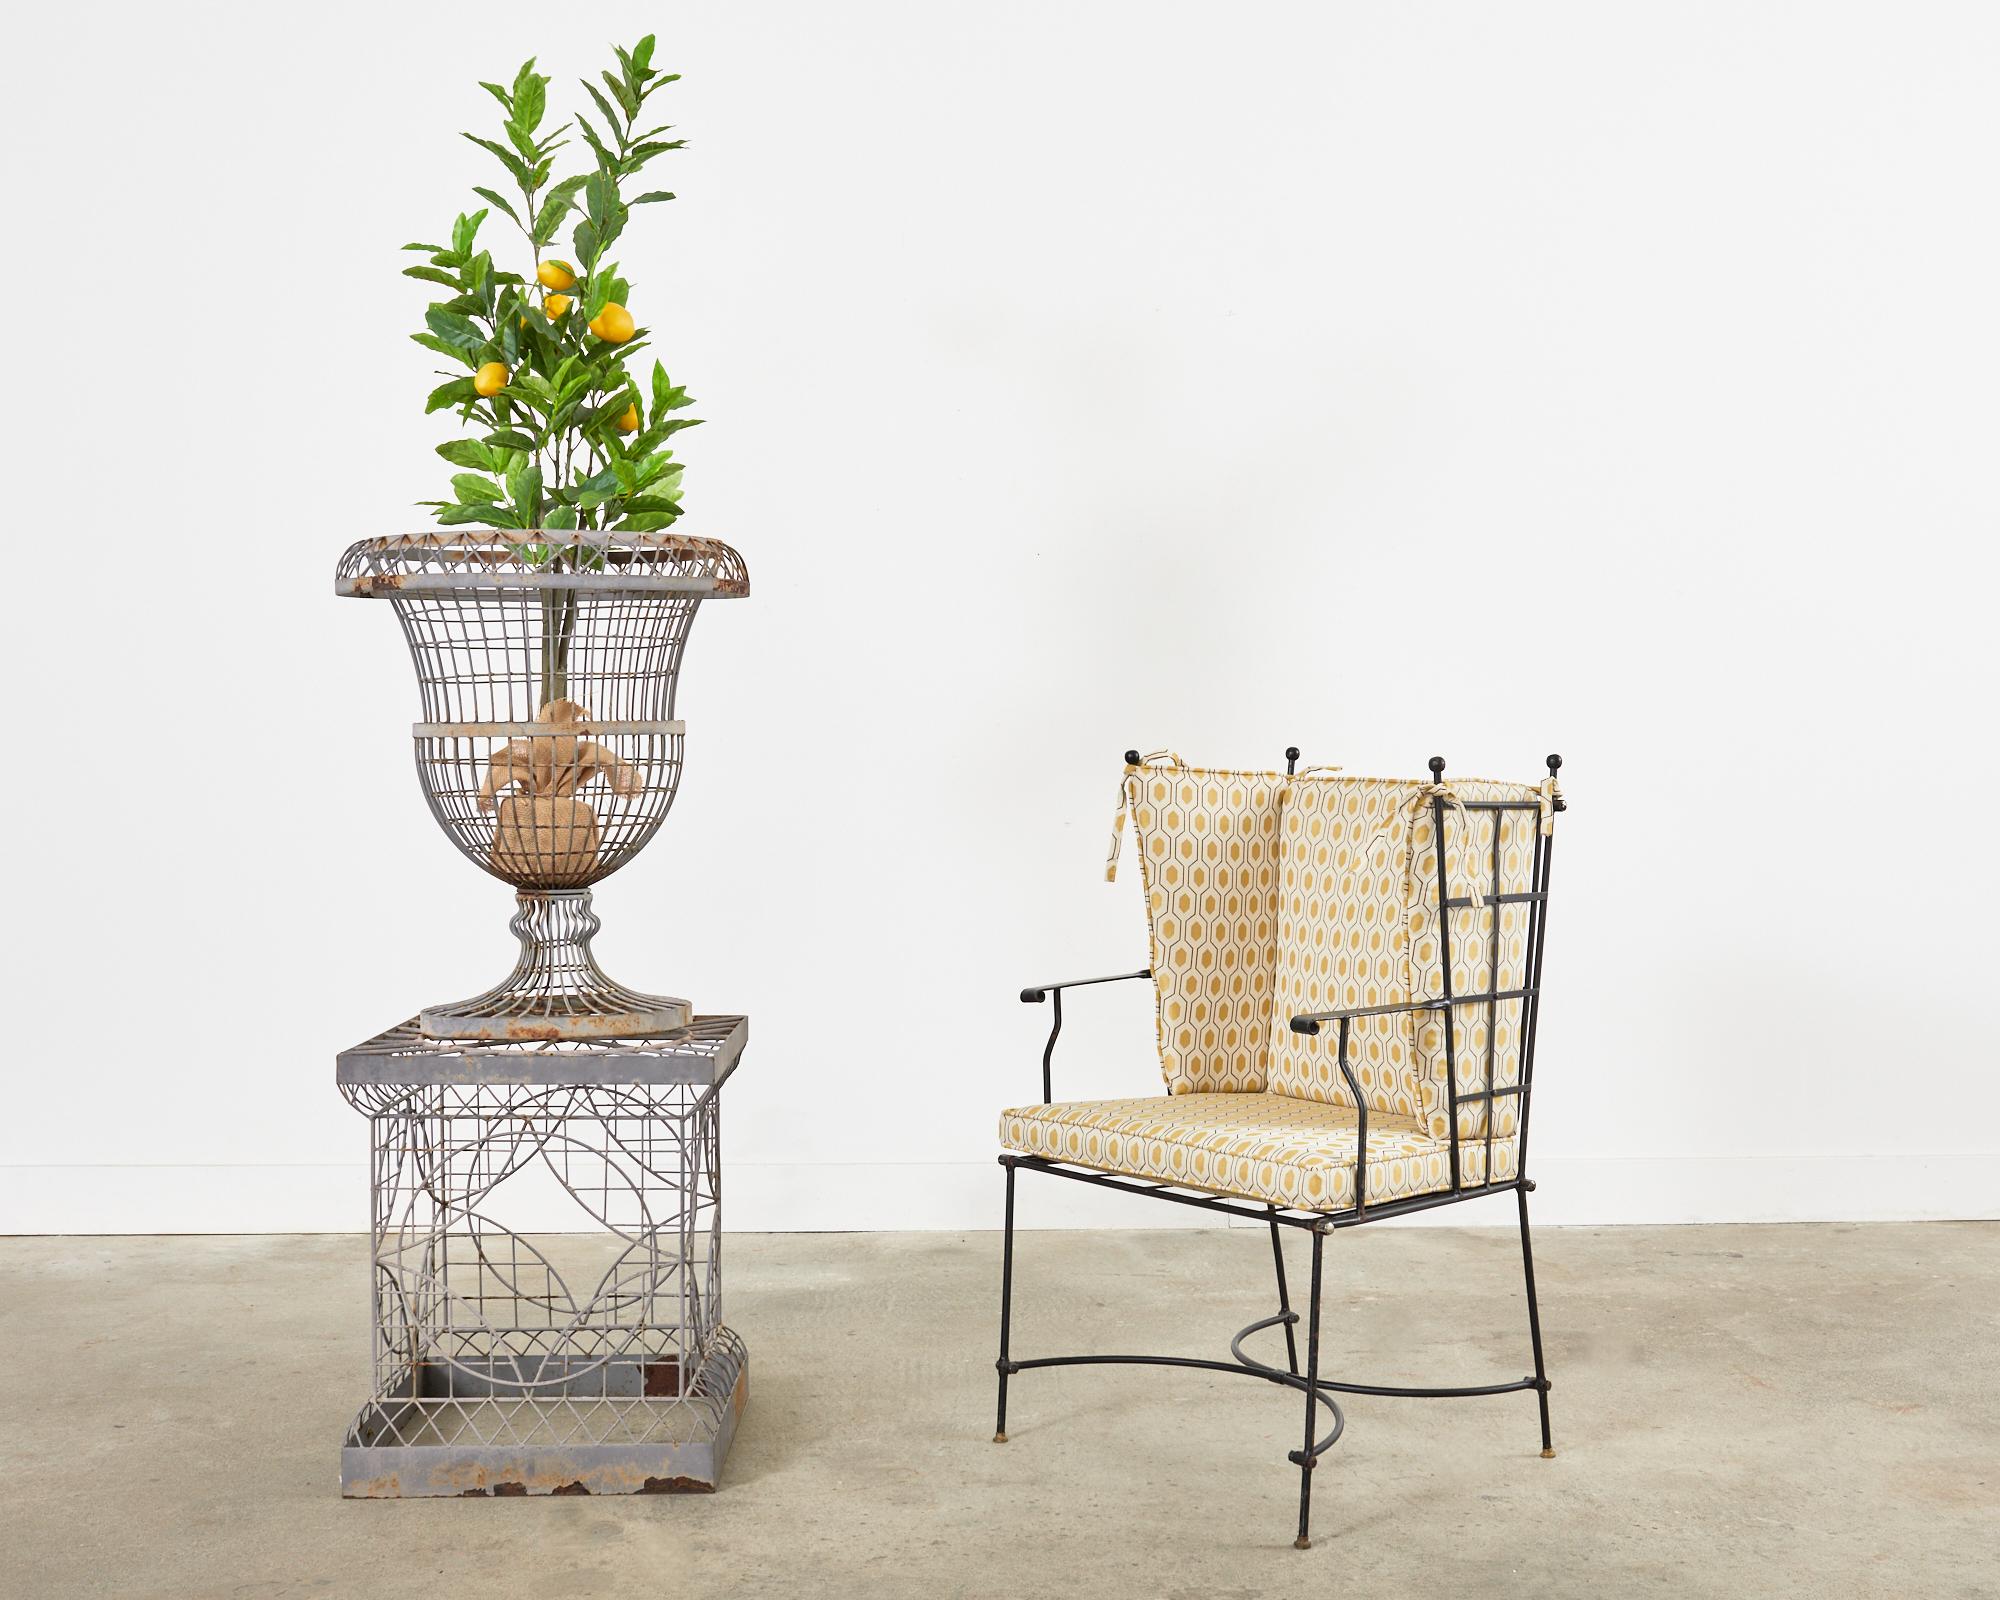 Whimsical Mid-Century Modern patio and garden wingback armchair made in the manner and style of Mario Papperzini for John Salterini. The armchair features a wrought iron frame with a lattice seat, back, and wings ending with ball finials. The